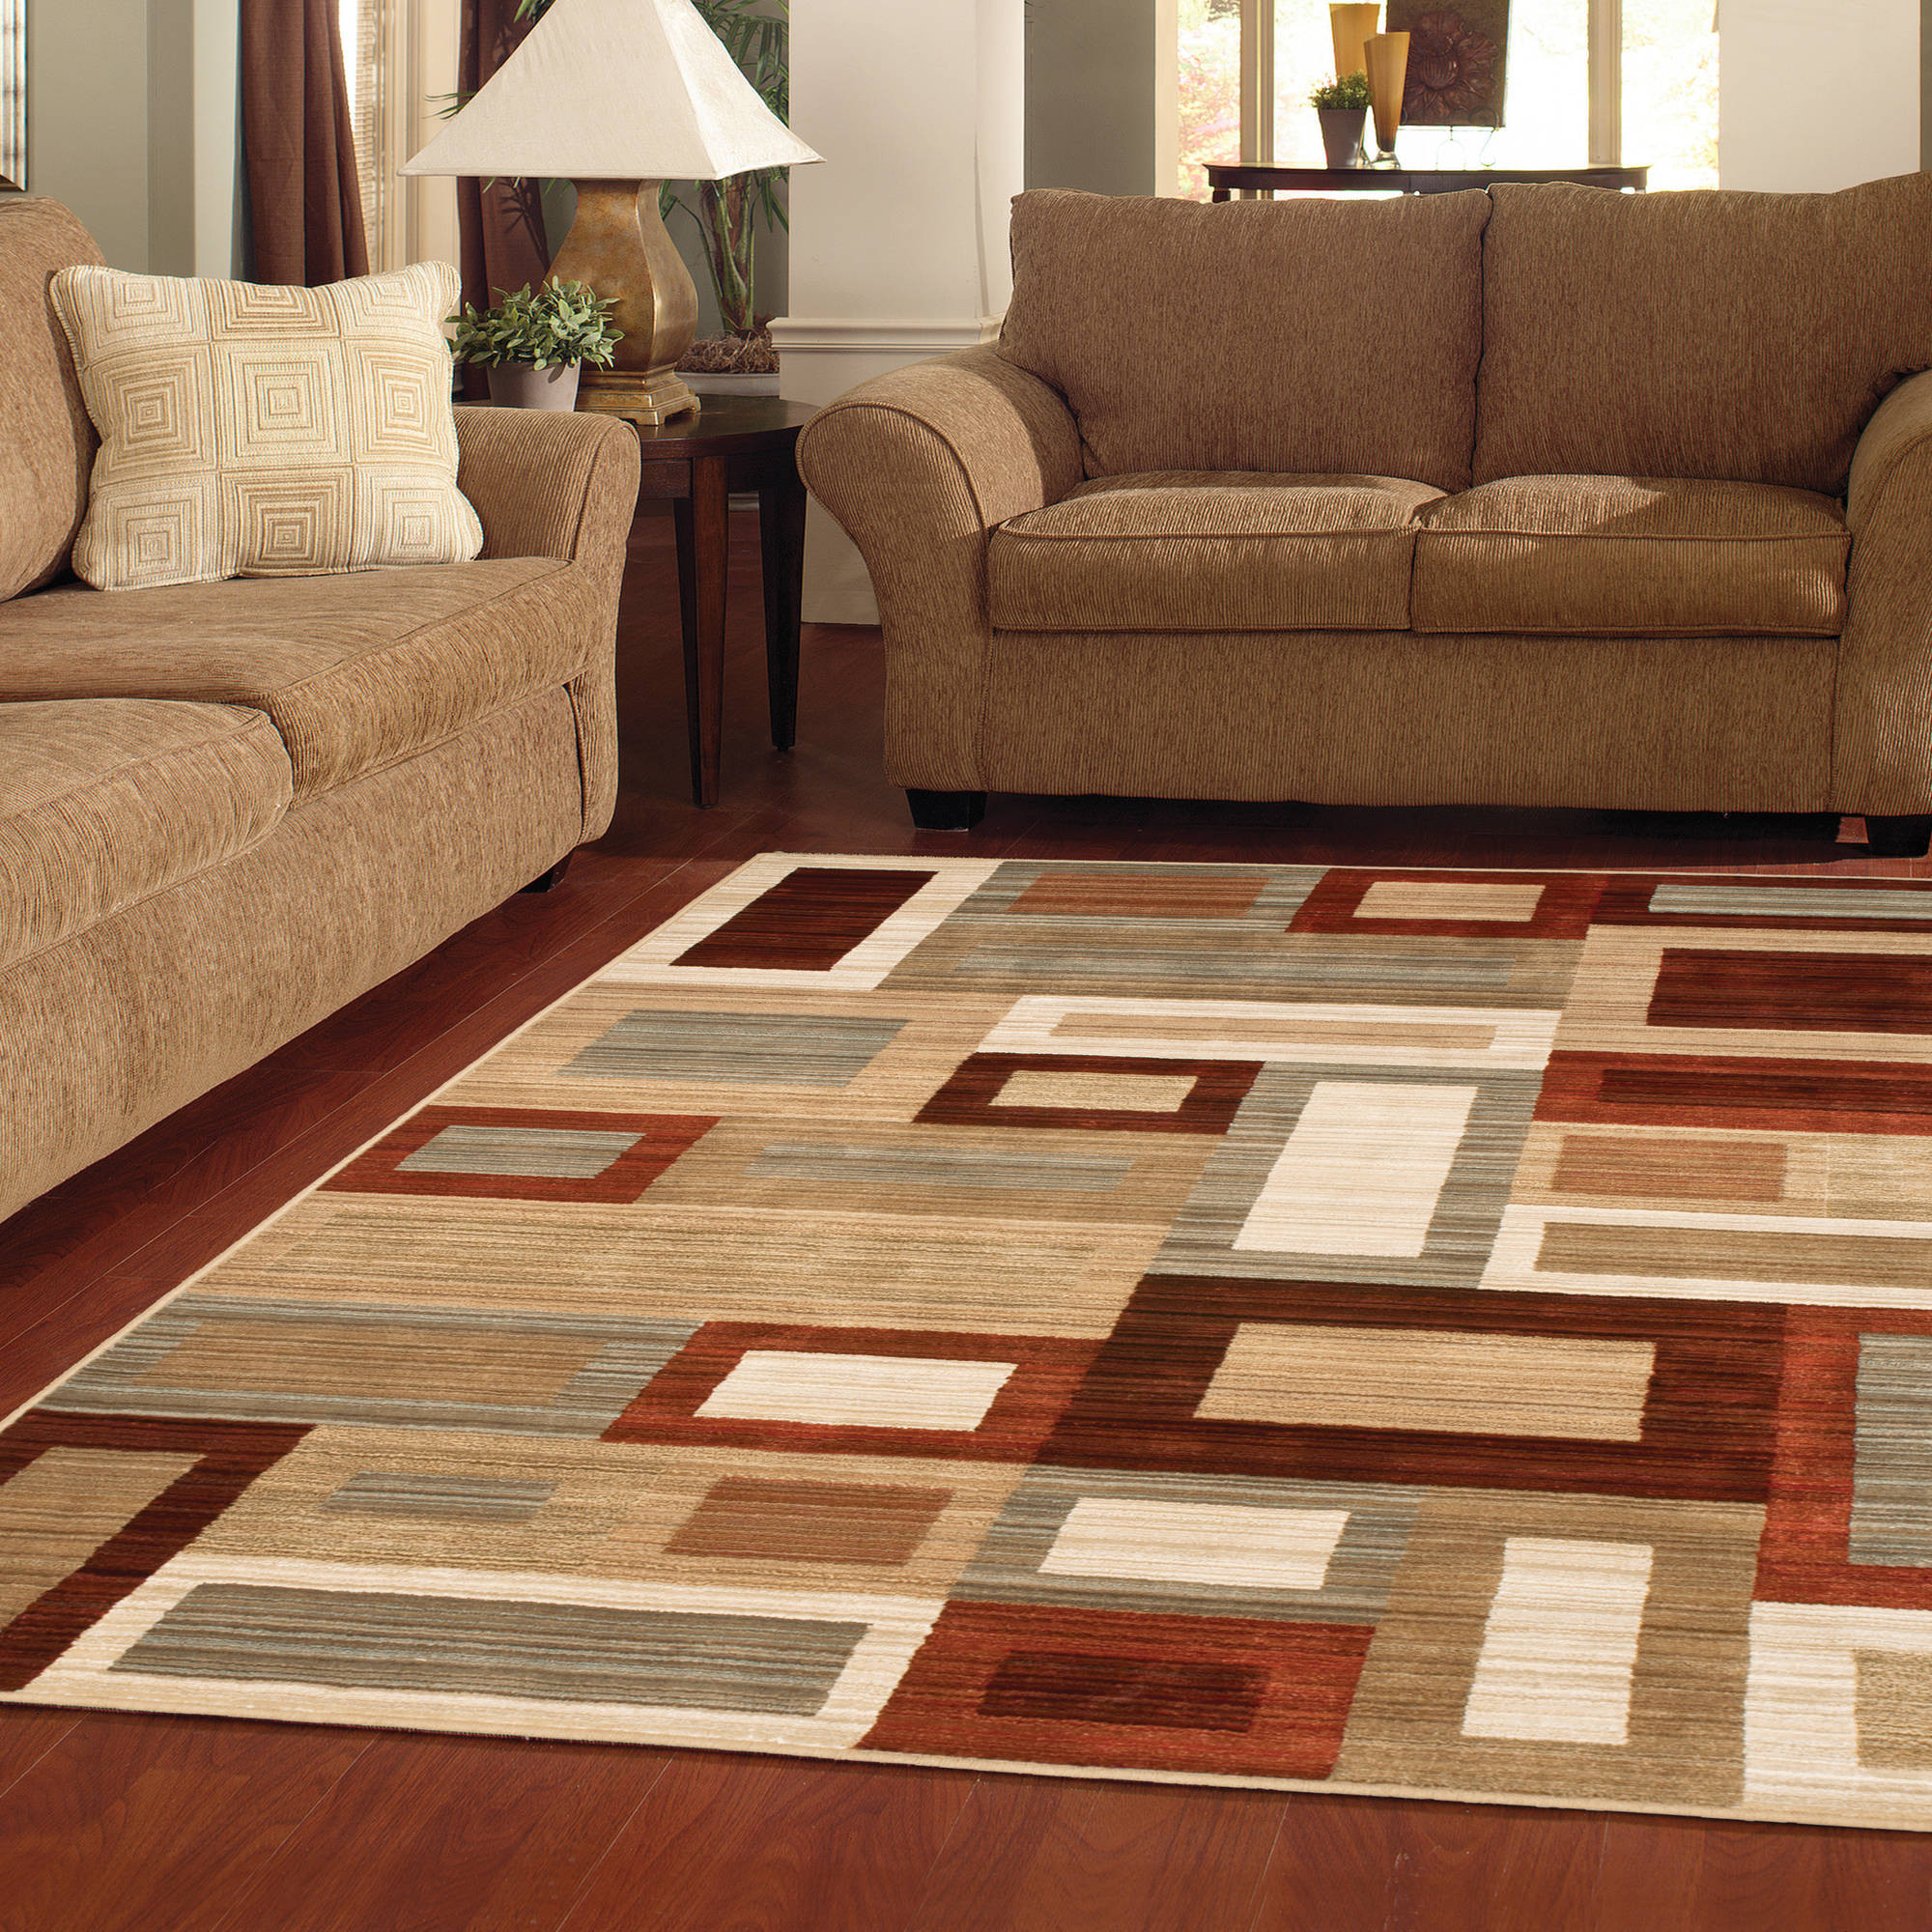 Living Room Area Rugs 8X10
 Rug Beautiful Walmart Rugs 8x10 For Your Flooring